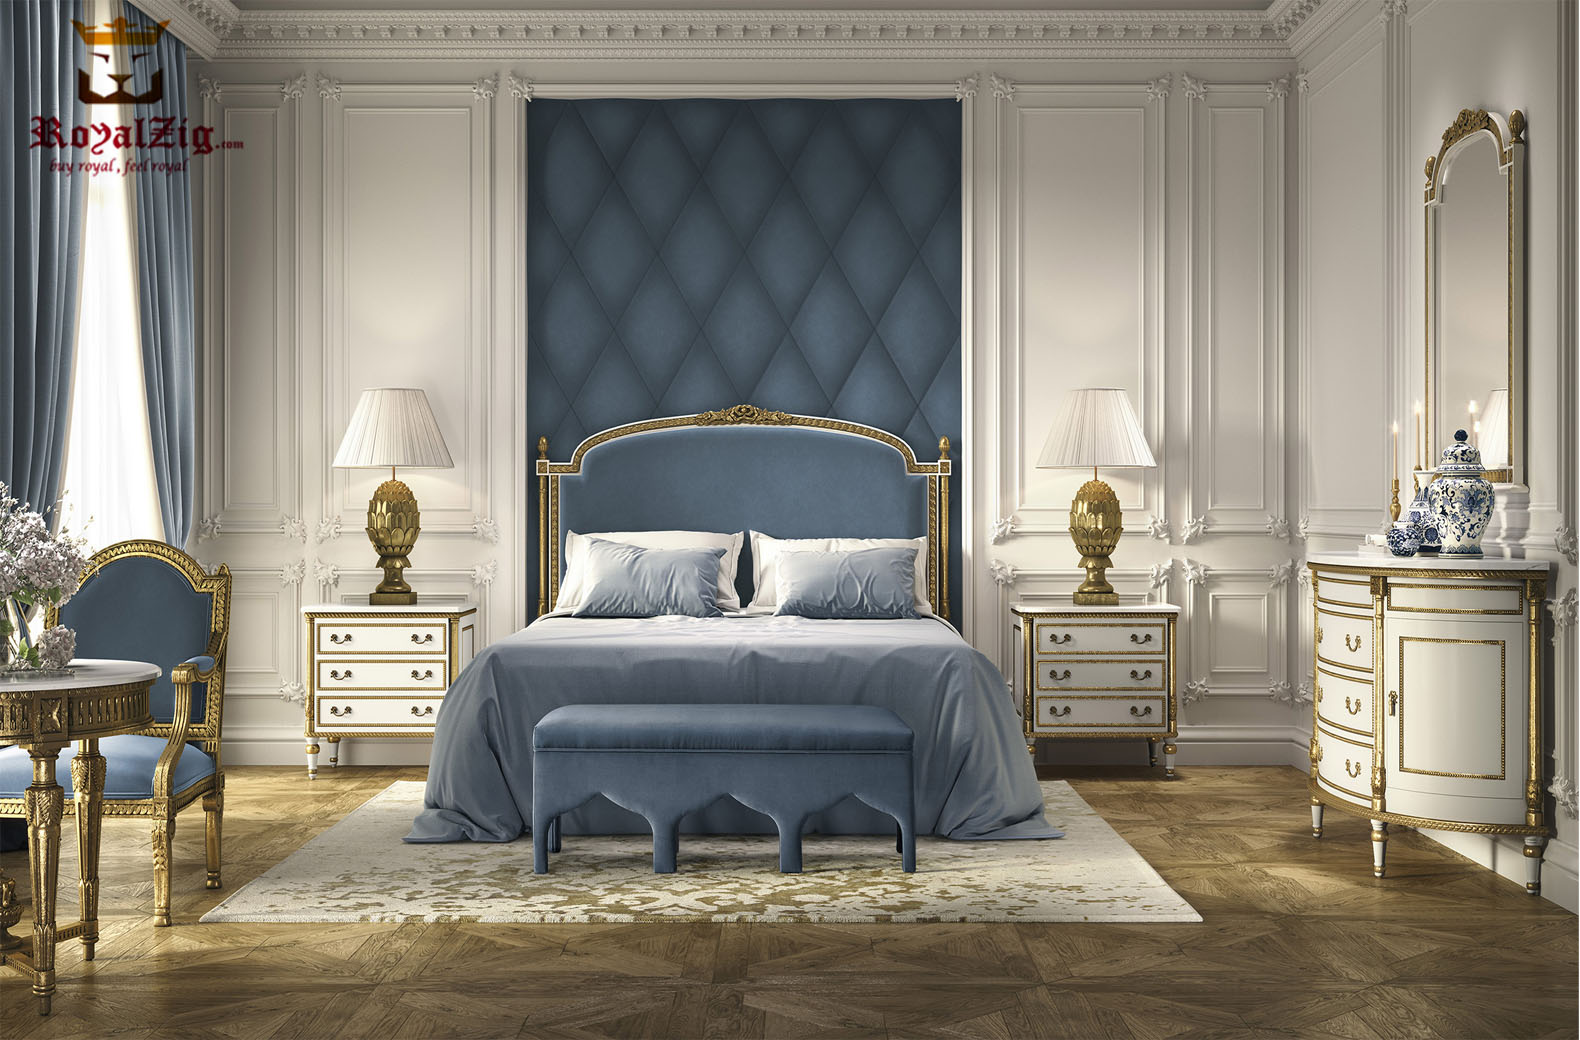 Luxury Bedroom Furniture in Wood Carving French Classic  Design Hand Carved in India Brand Royalzig Luxury Furniture 